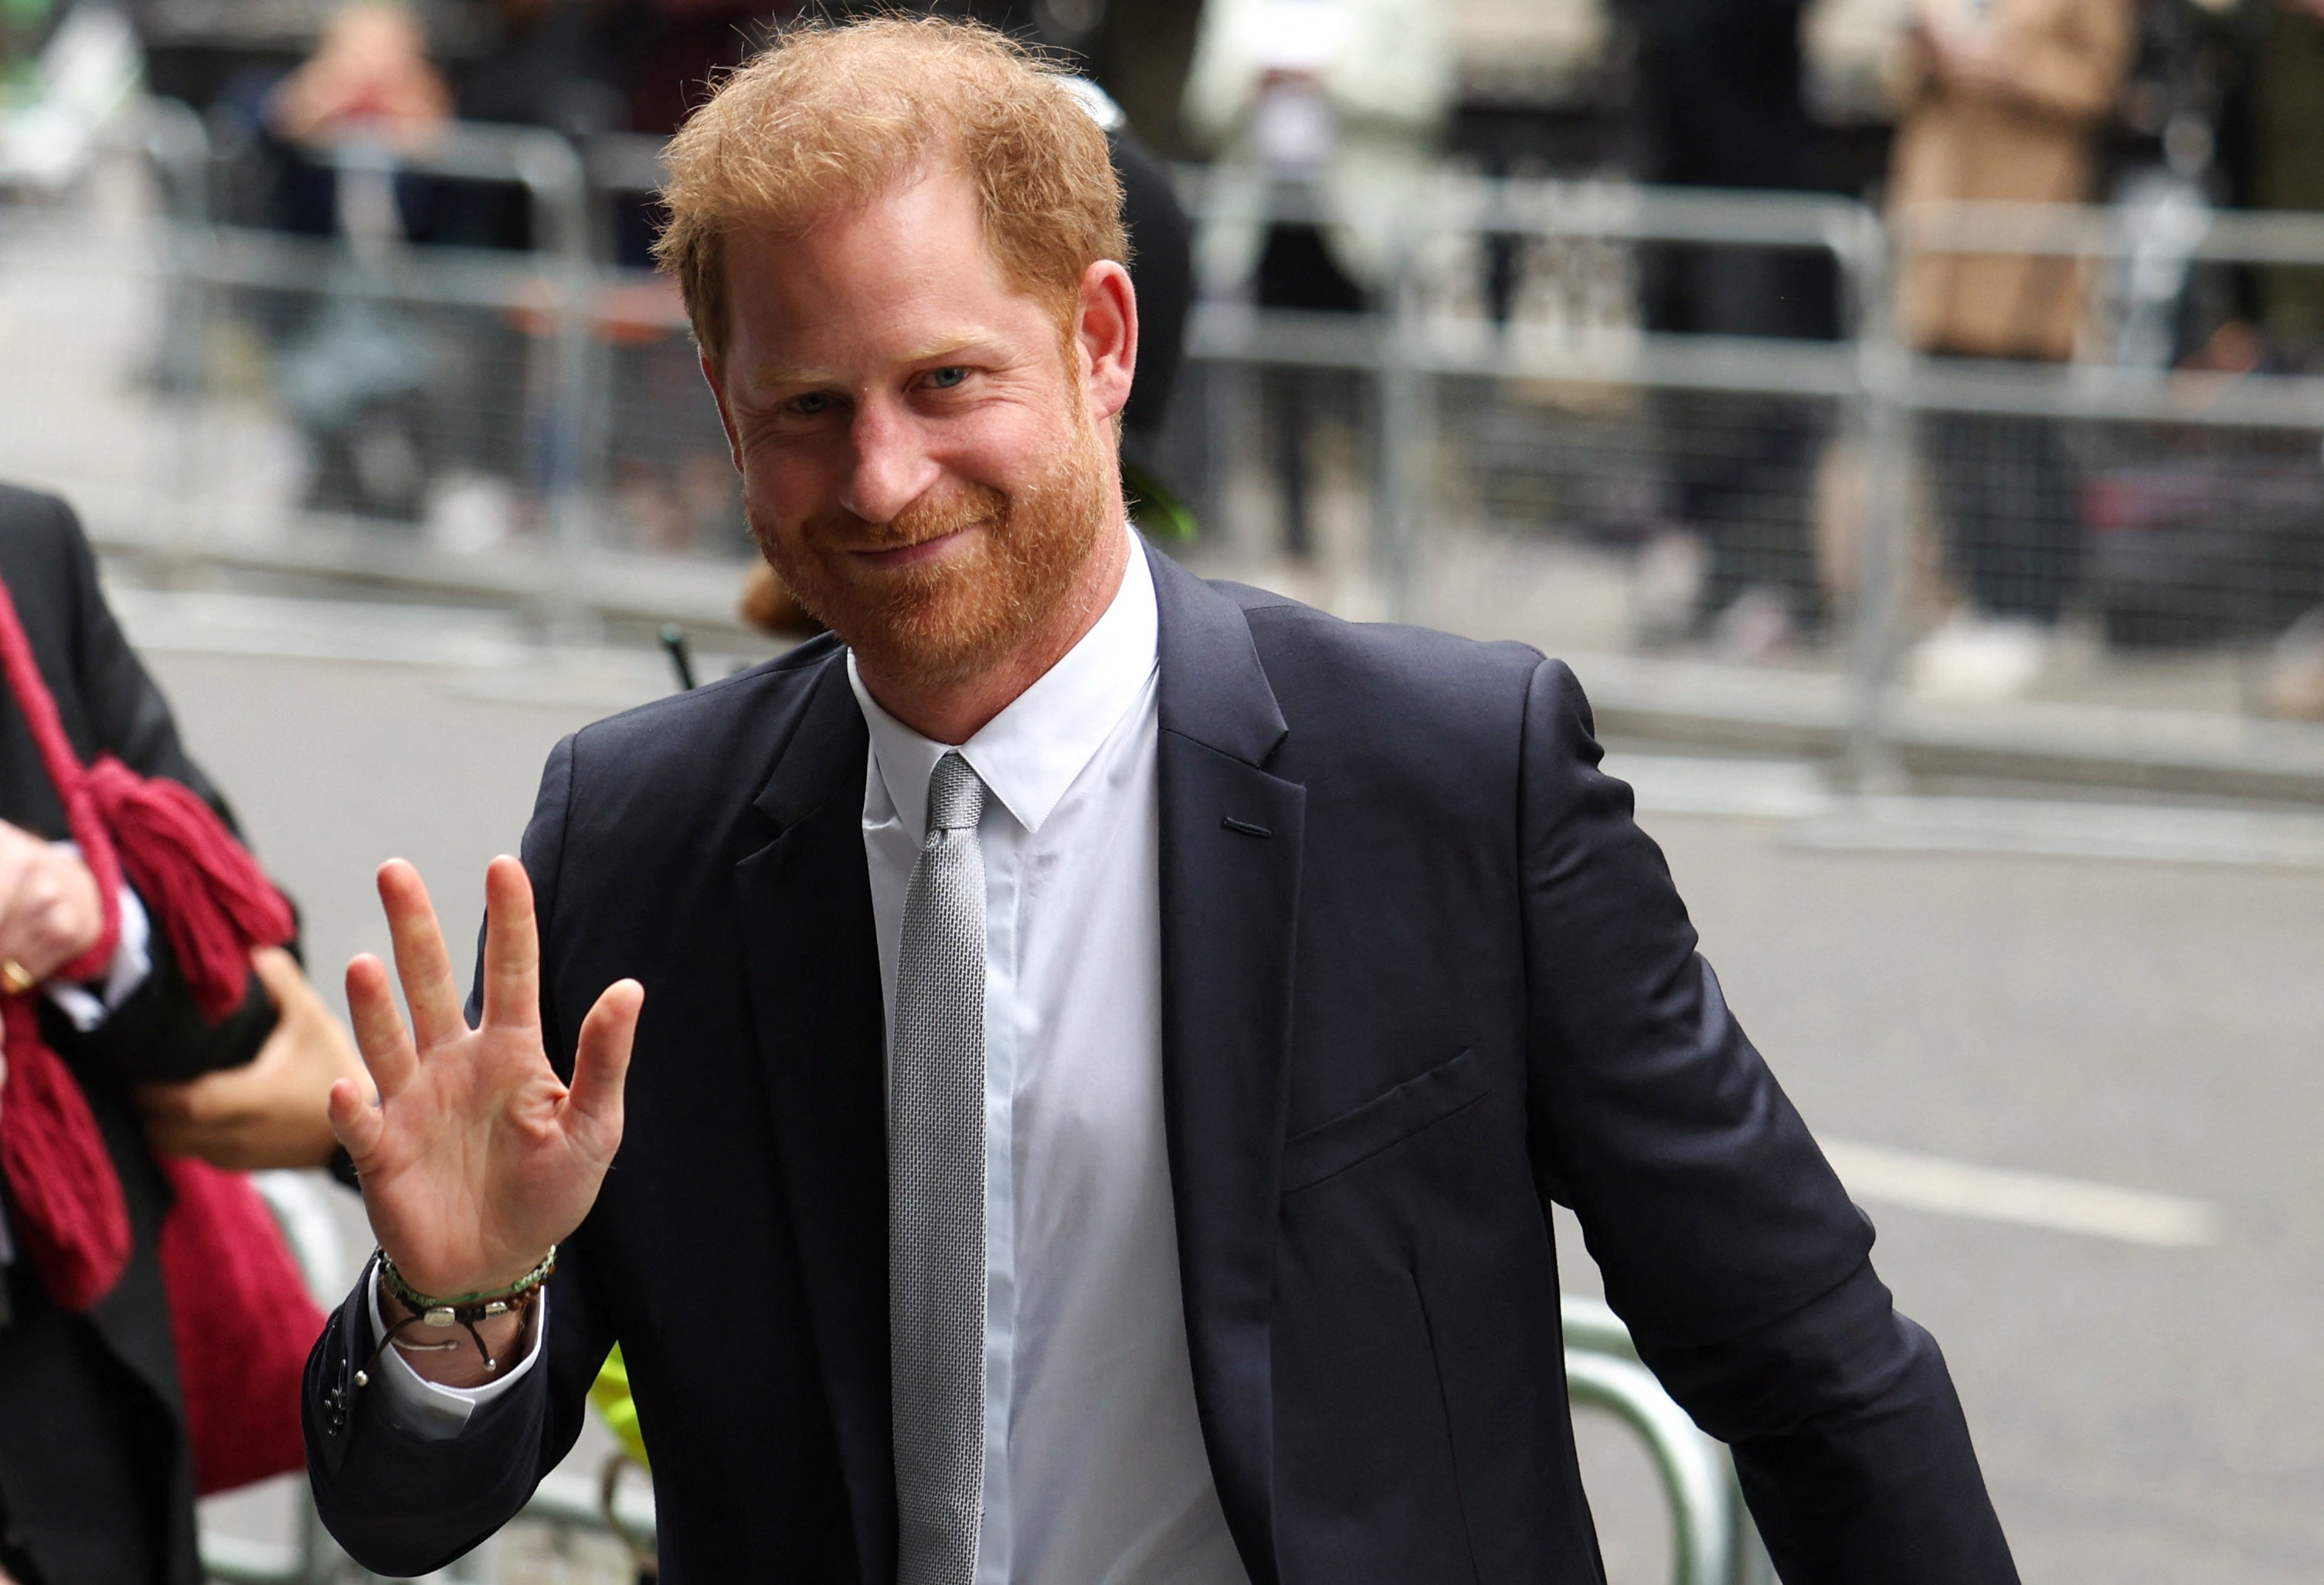 Britain’s Prince Harry, Duke of Sussex, waves as he arrives to the Royal Courts of Justice, Britain’s High Court, in central London on 7 June, 2023.